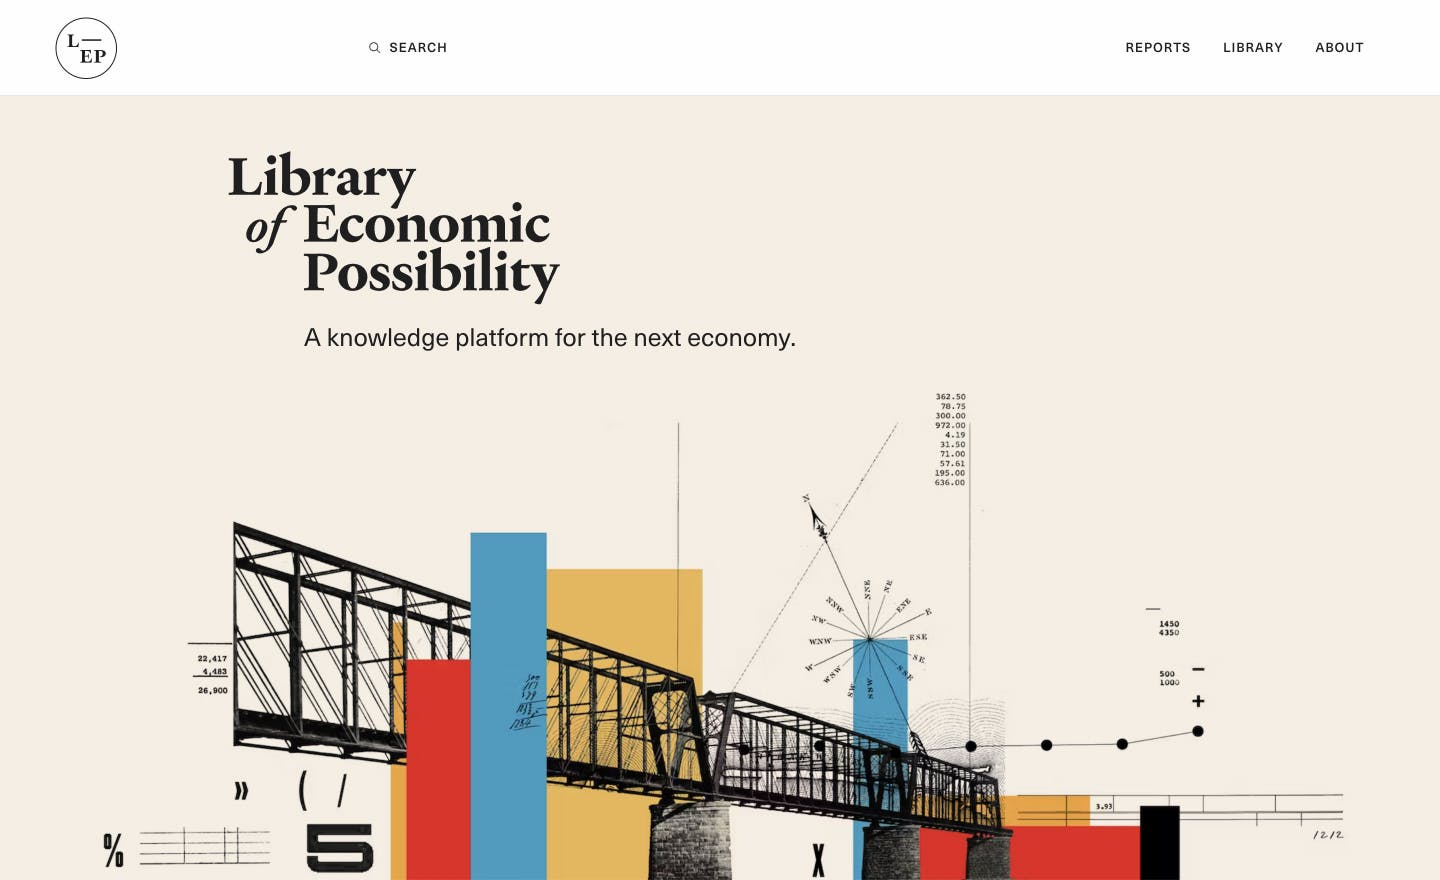 The Library of Economic Possibility